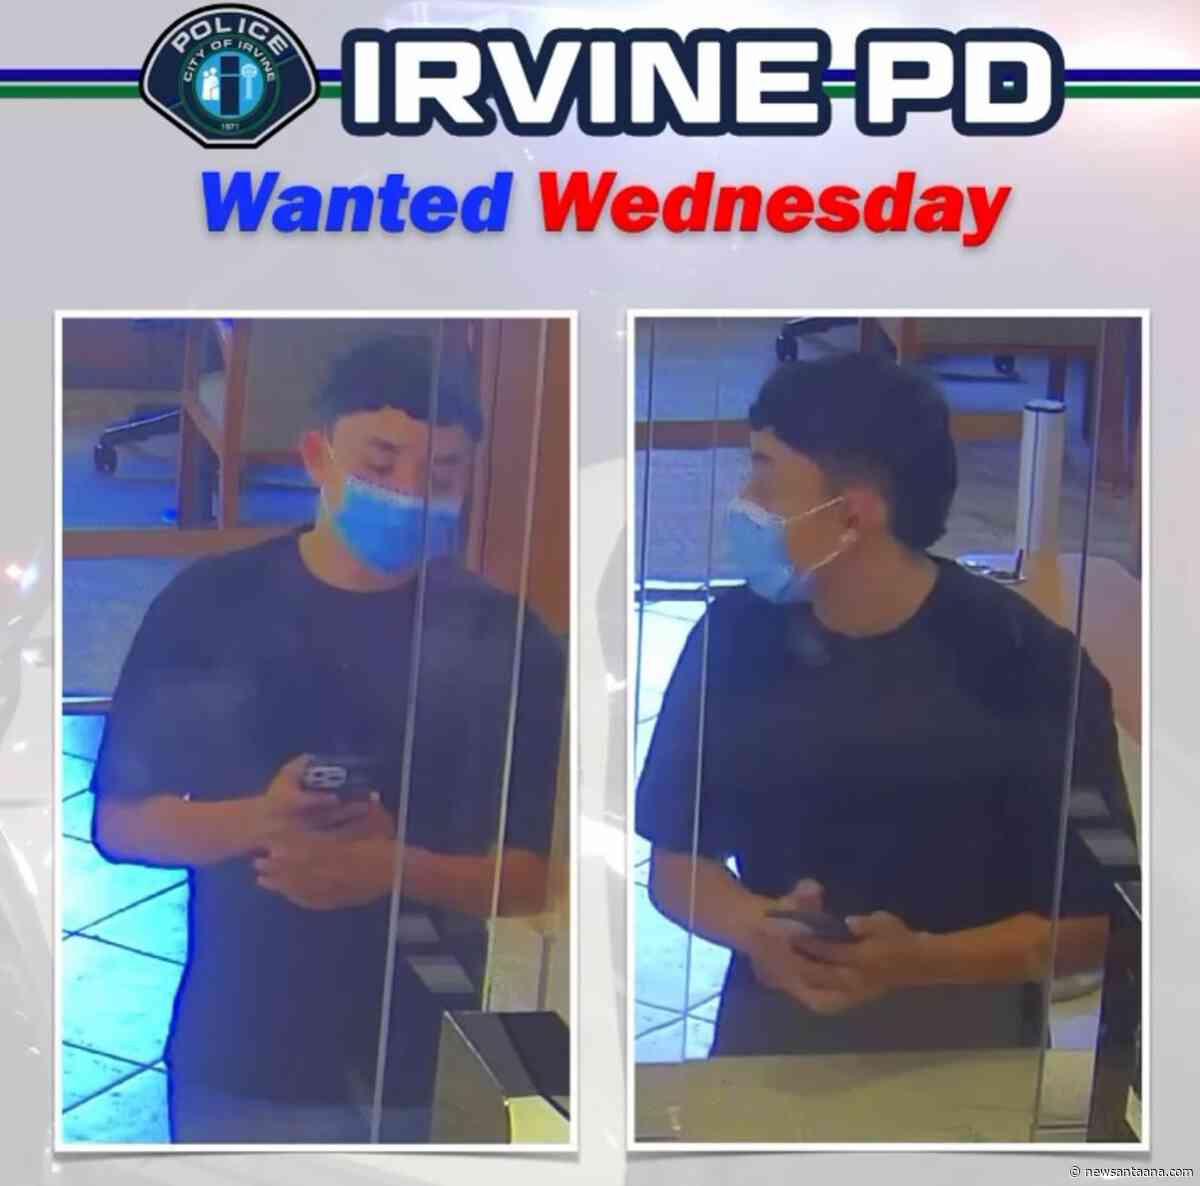 The Irvine Police are trying to identify a man who stole jewelry from a vehicle